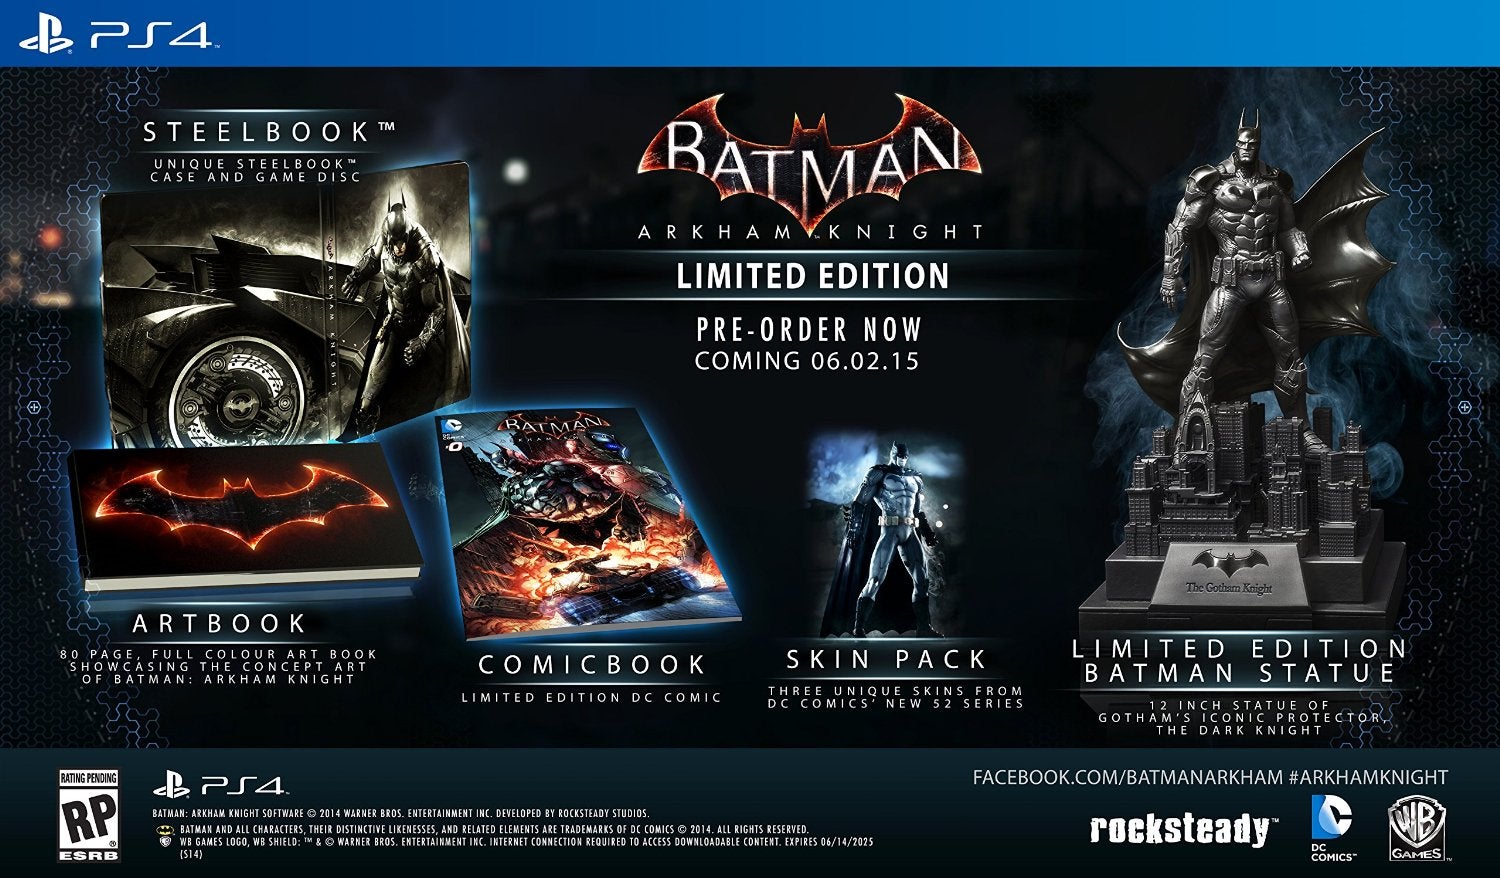 Image for Batman: Arkham Knight Limited Edition delayed over "packaging quality issue"